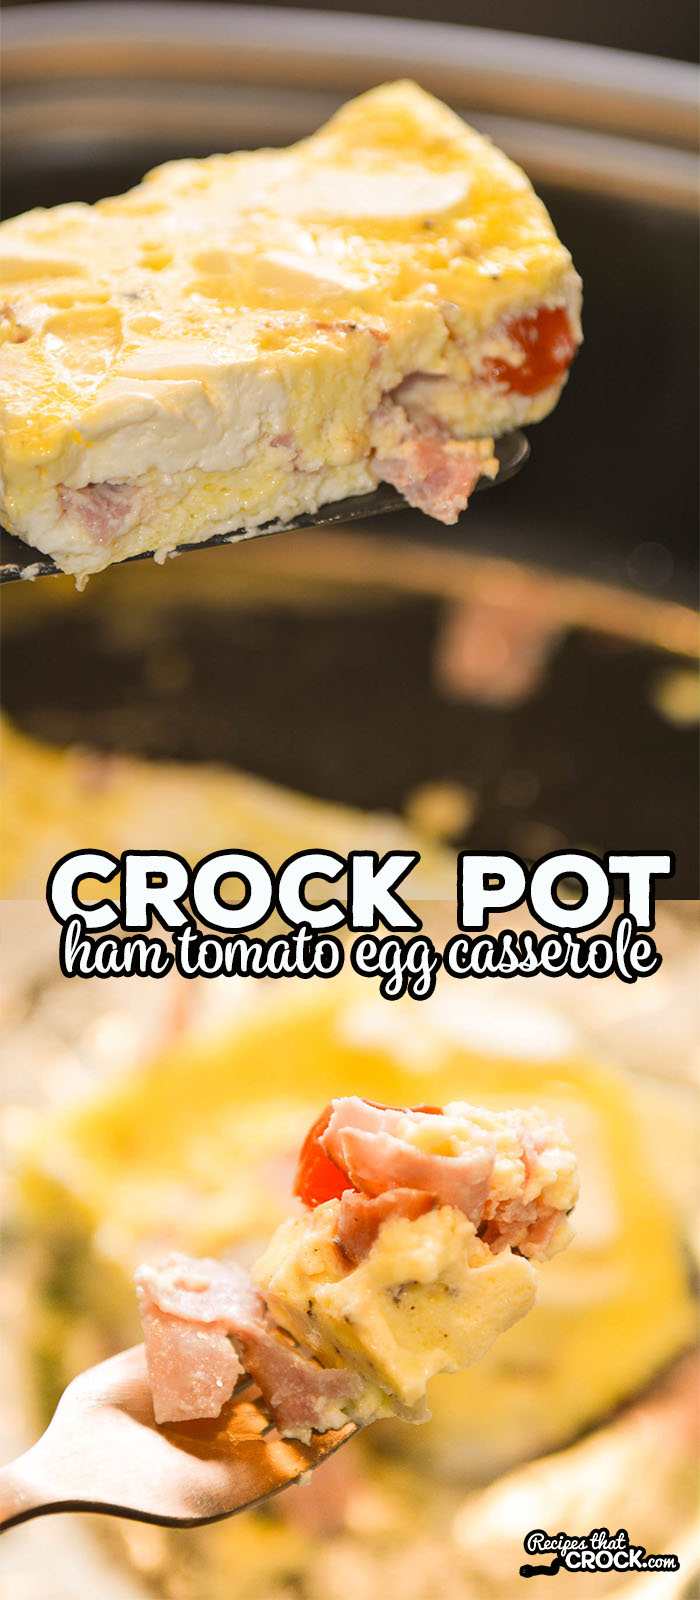 This Crock Pot Ham Tomato Egg Casserole is our go-to breakfast at home and when traveling.This breakfast slow cooker recipe is so easy to throw into the slow cooker and serve up a filling hot breakfast that everyone loves.